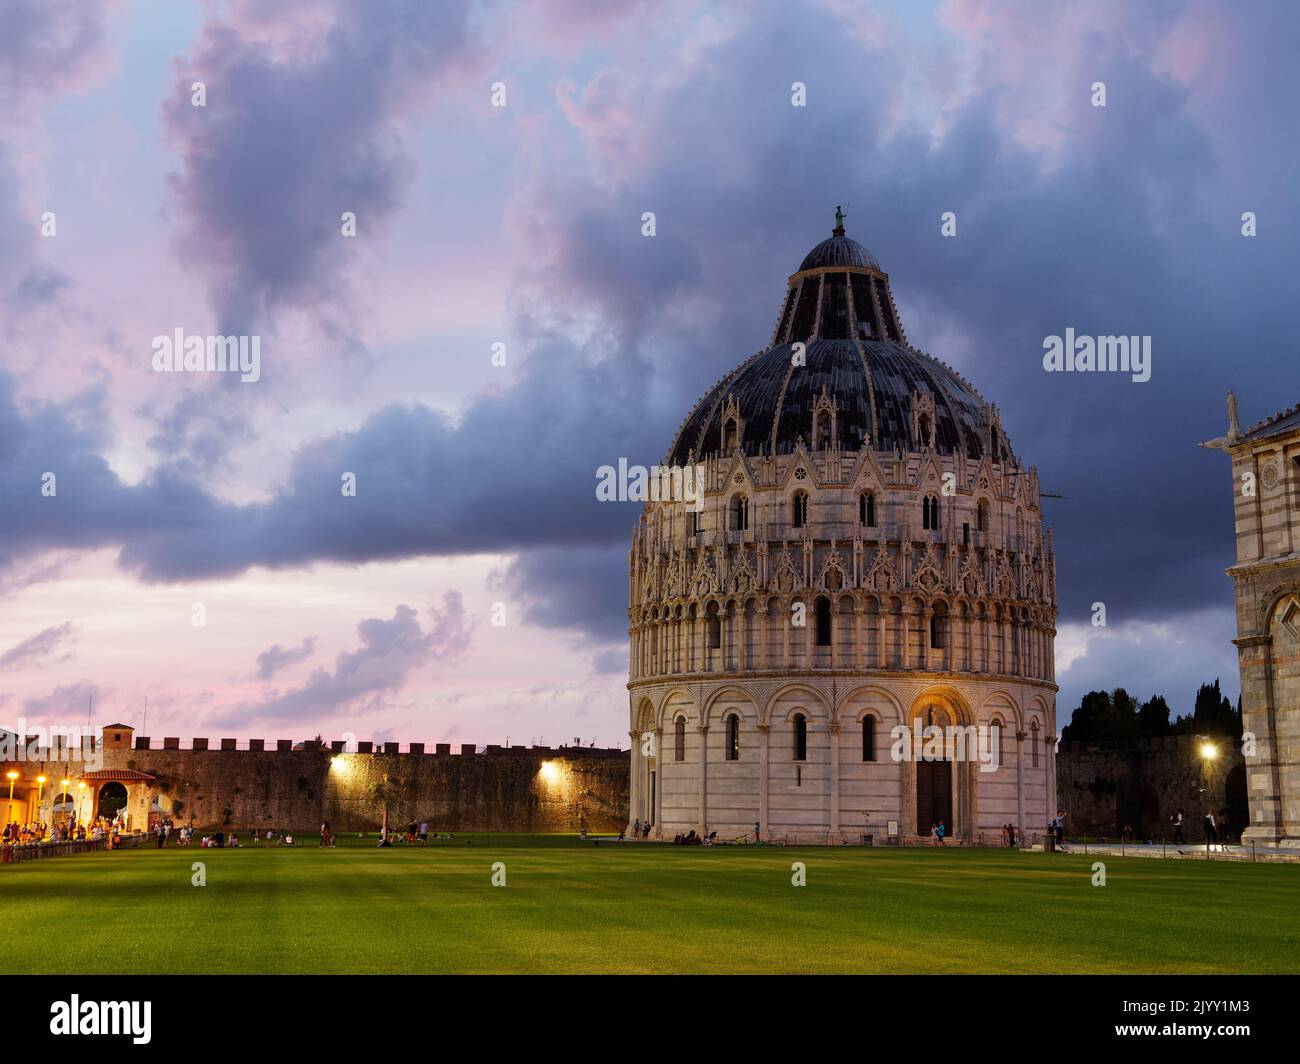 Square of Miracles in Pisa, Tuscany, Italy. Baptistery at dusk with a dramatic grey and red sky. Stock Photo